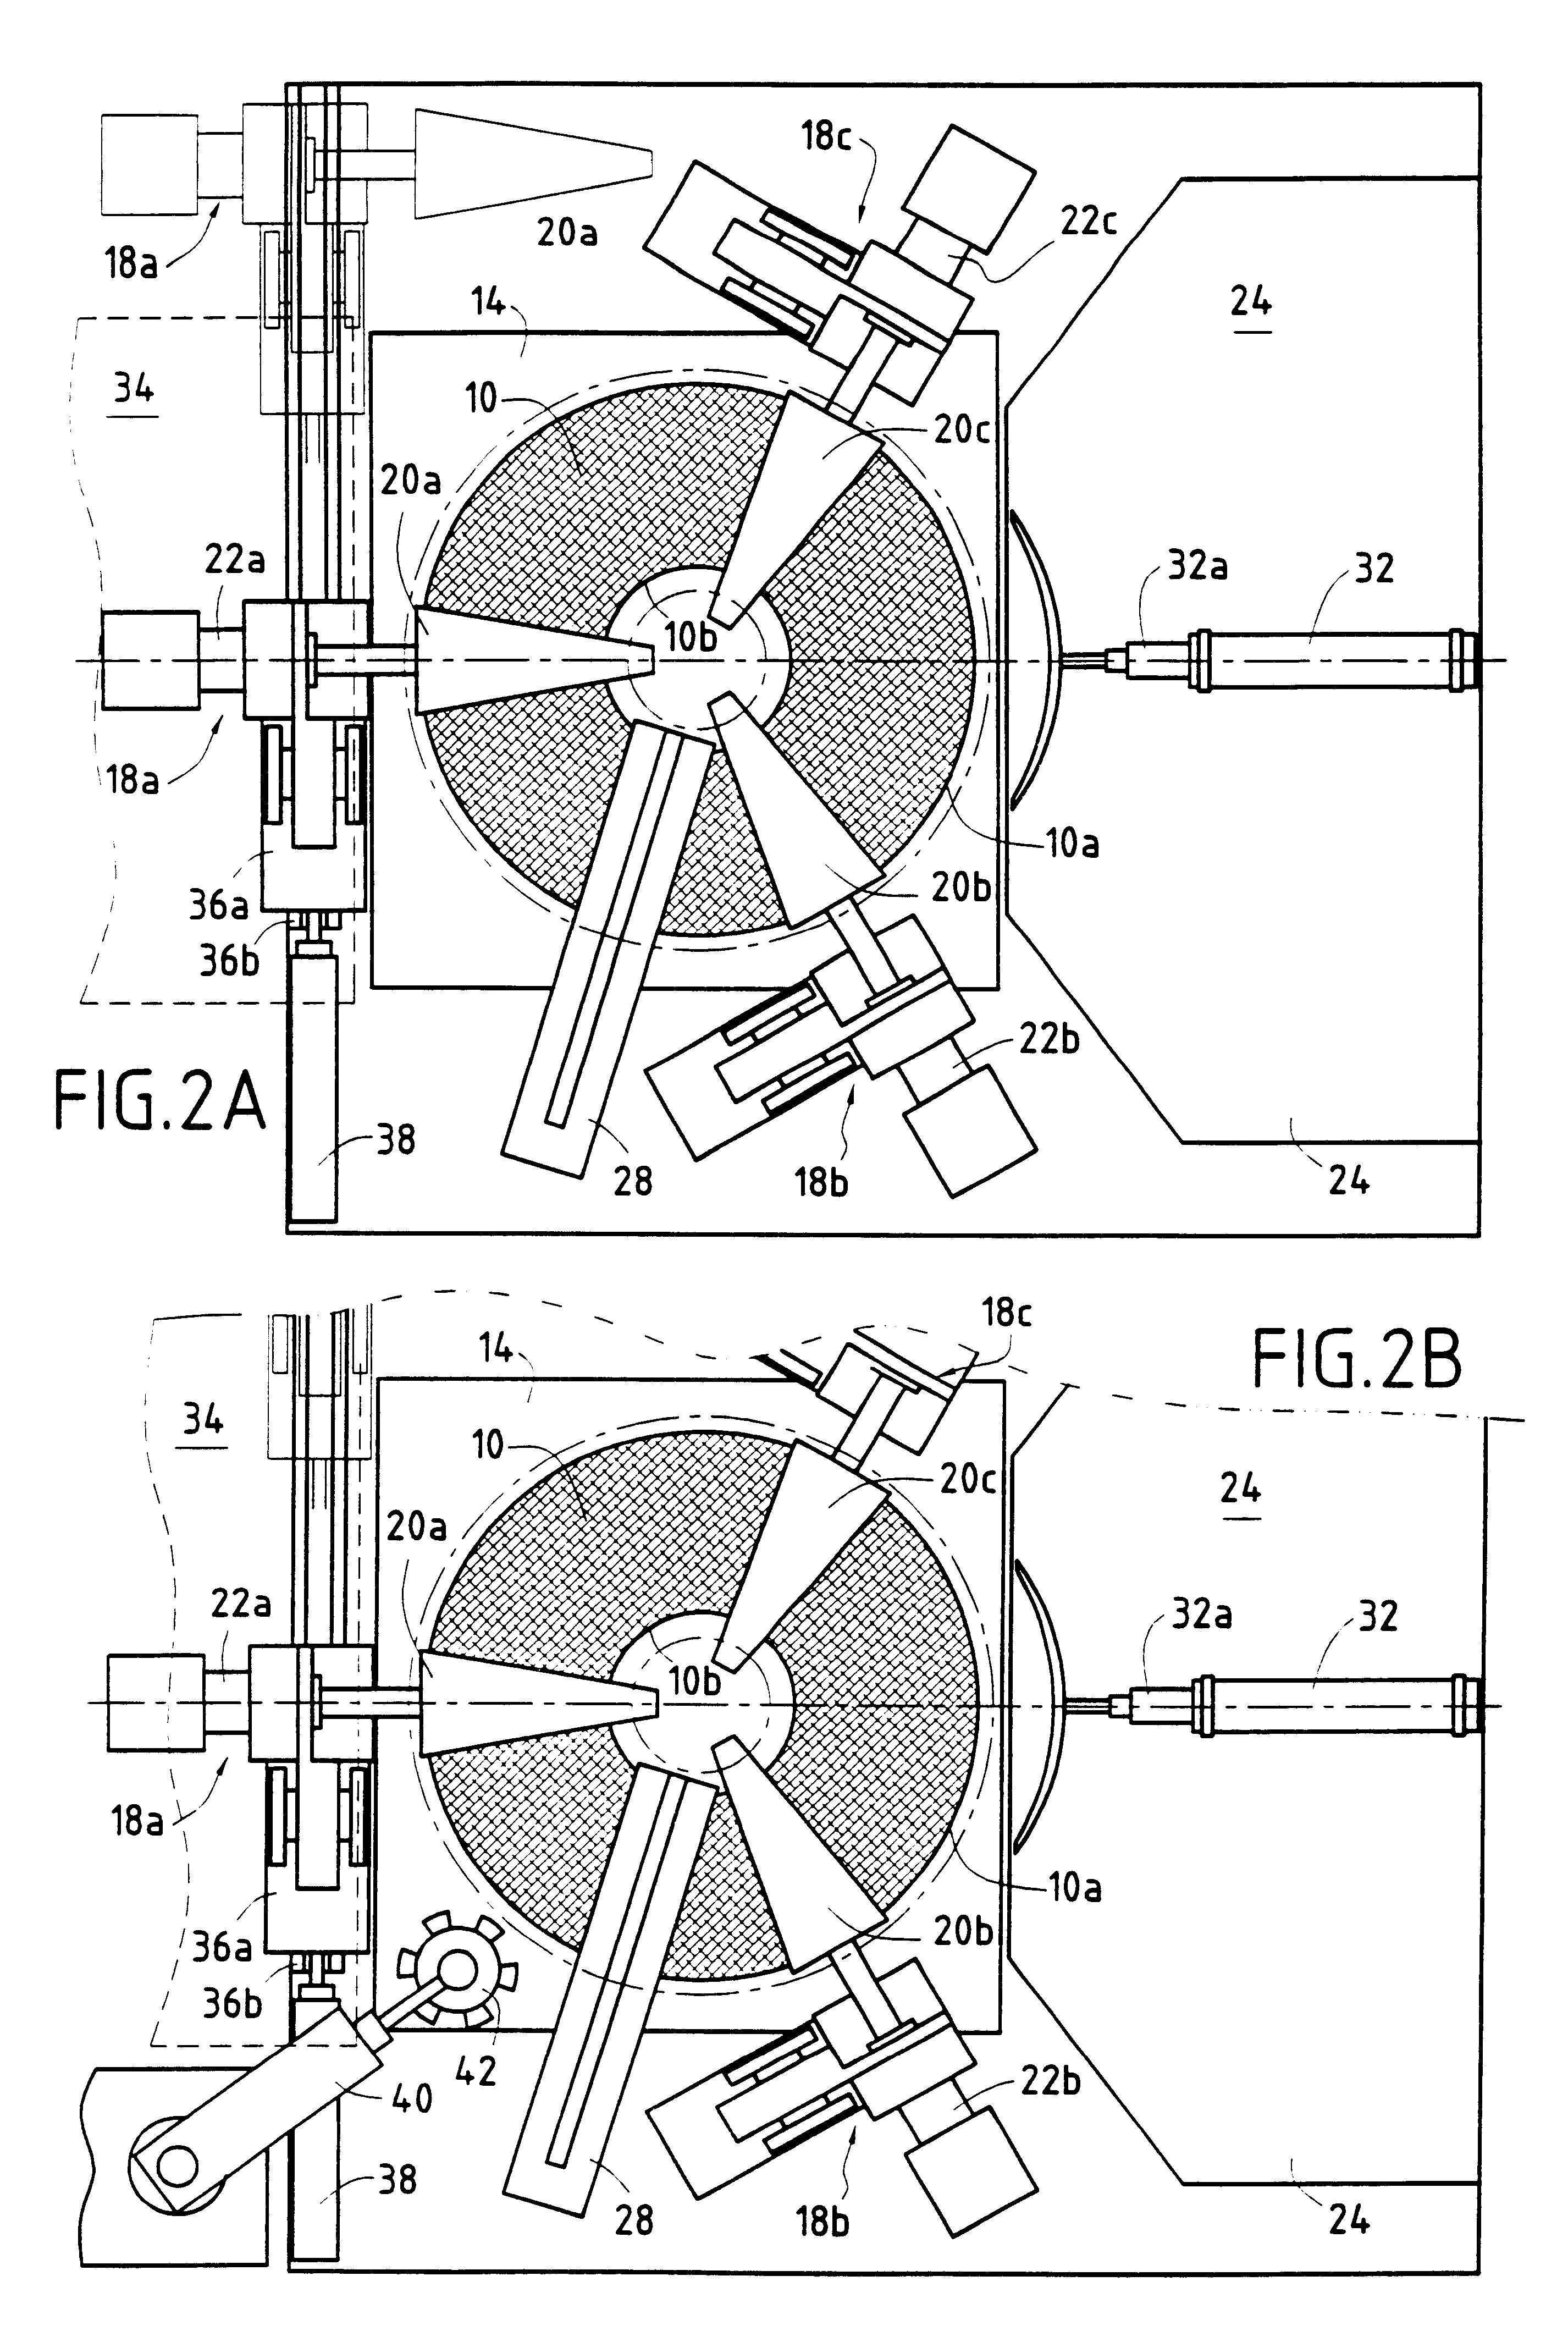 Circular needling machine provided with a device for automatically removing preforms